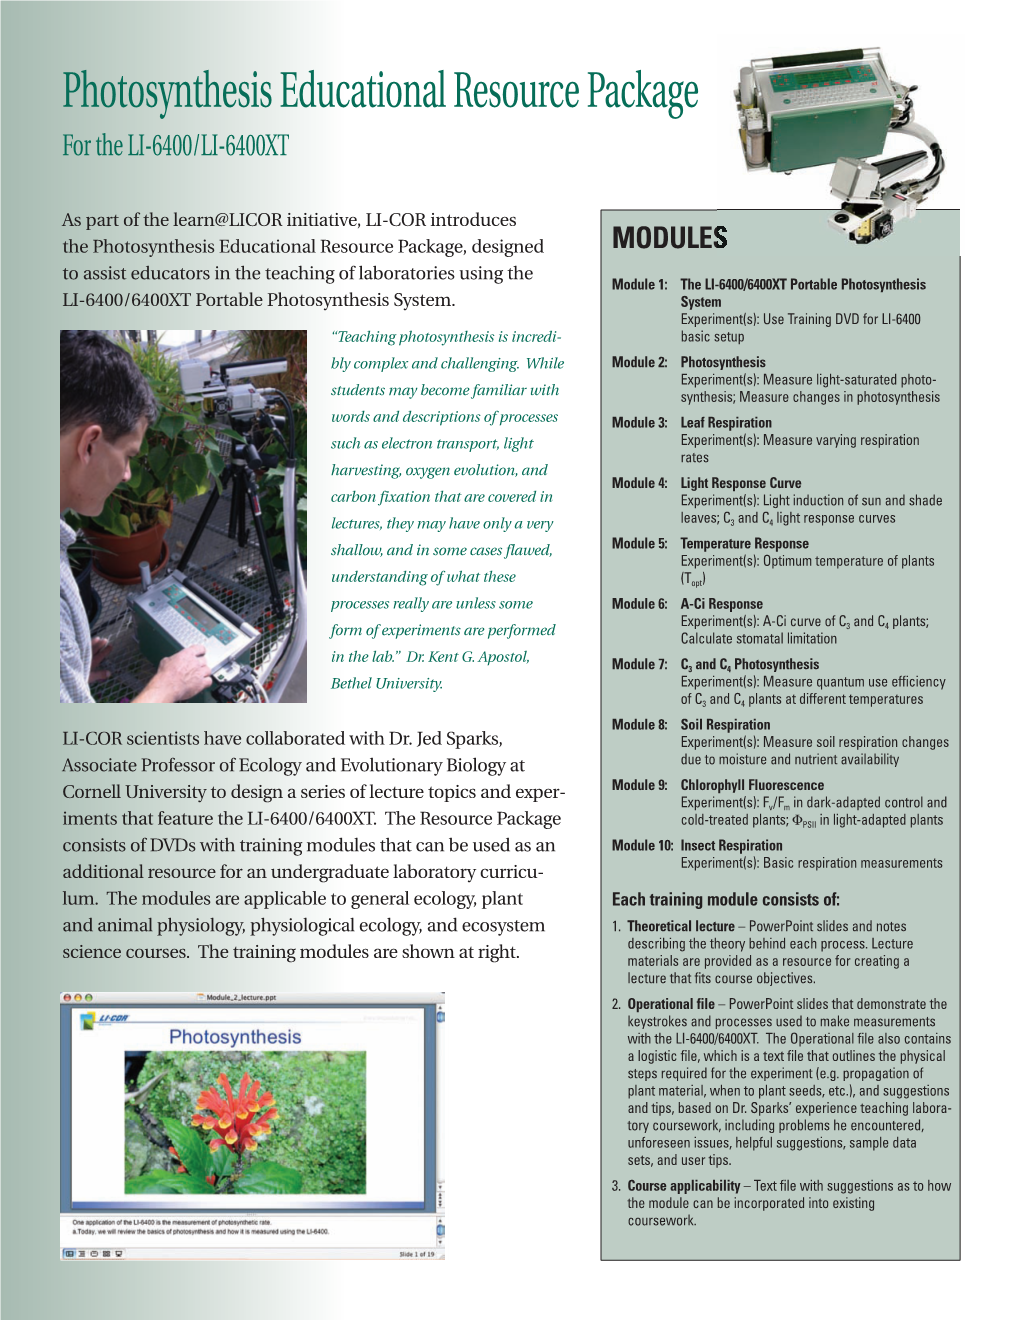 Photosynthesis Educational Resource Package for the LI-6400/LI-6400XT